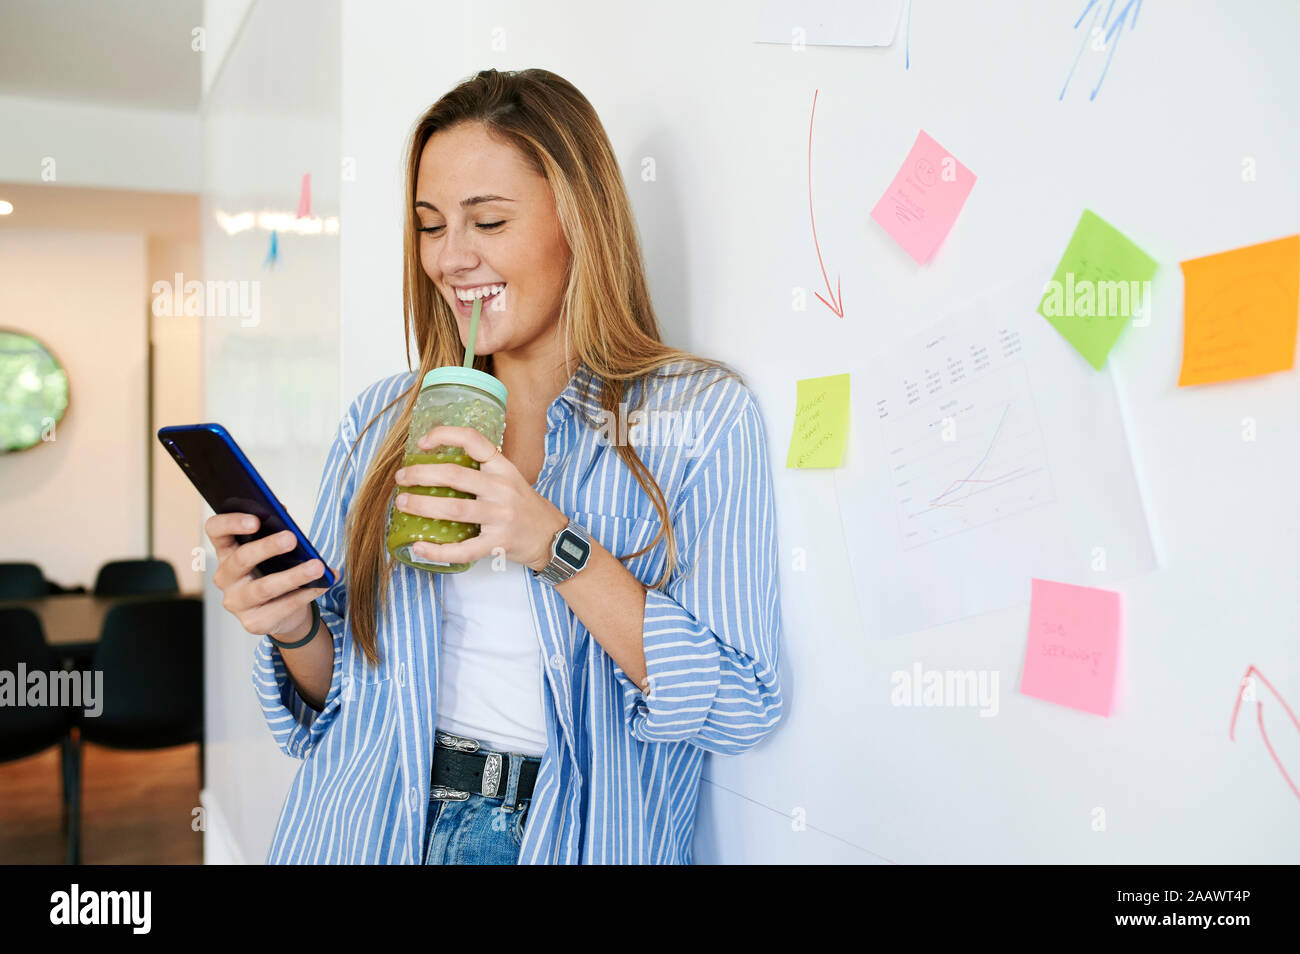 Happy casual young businesswoman with drink and cell phone in an office Stock Photo